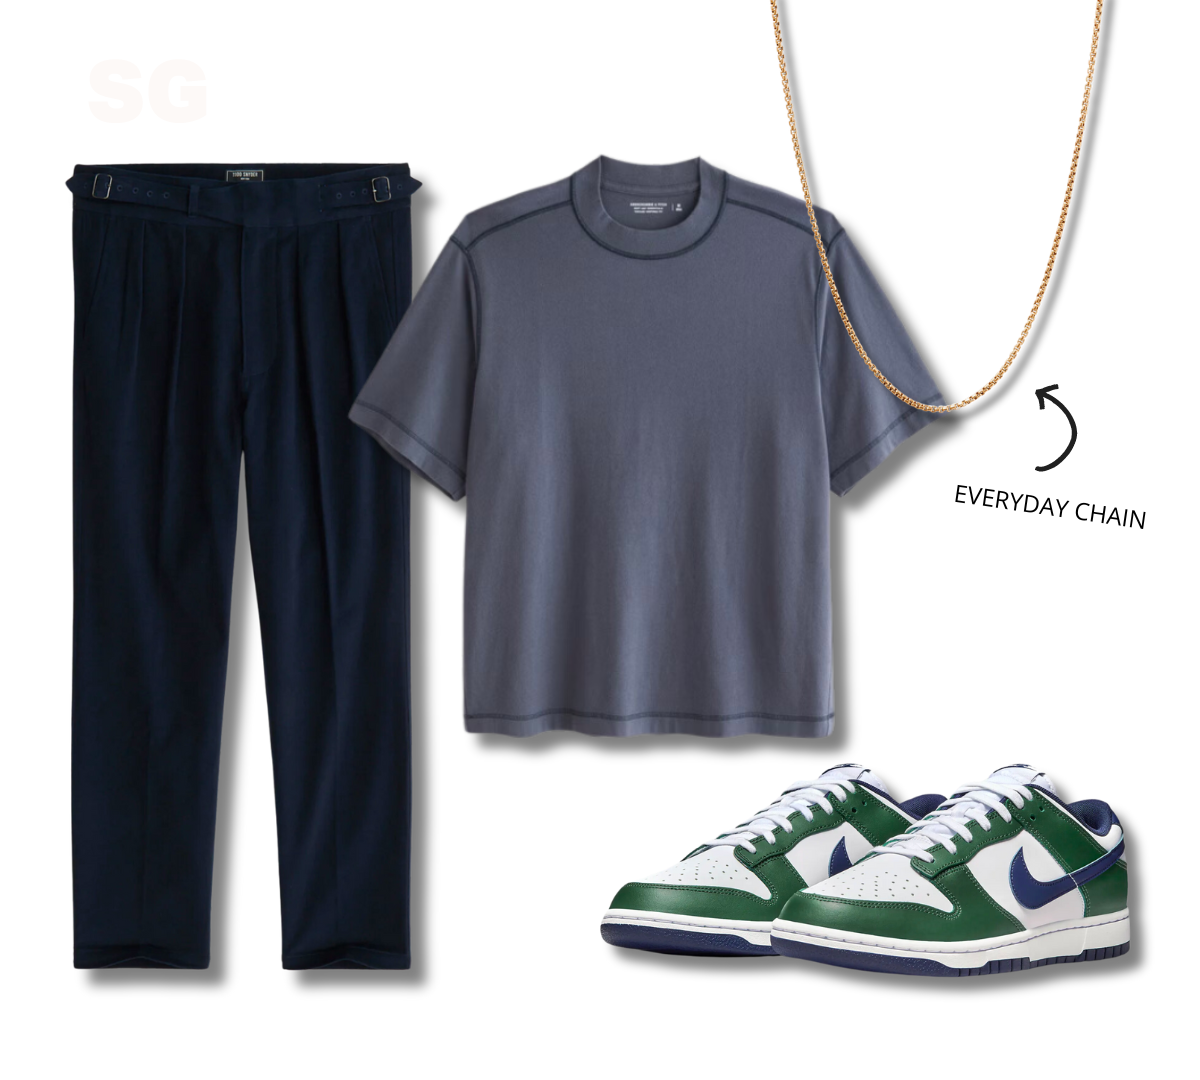 nike dunks outfit for men with dress pants and t-shirt